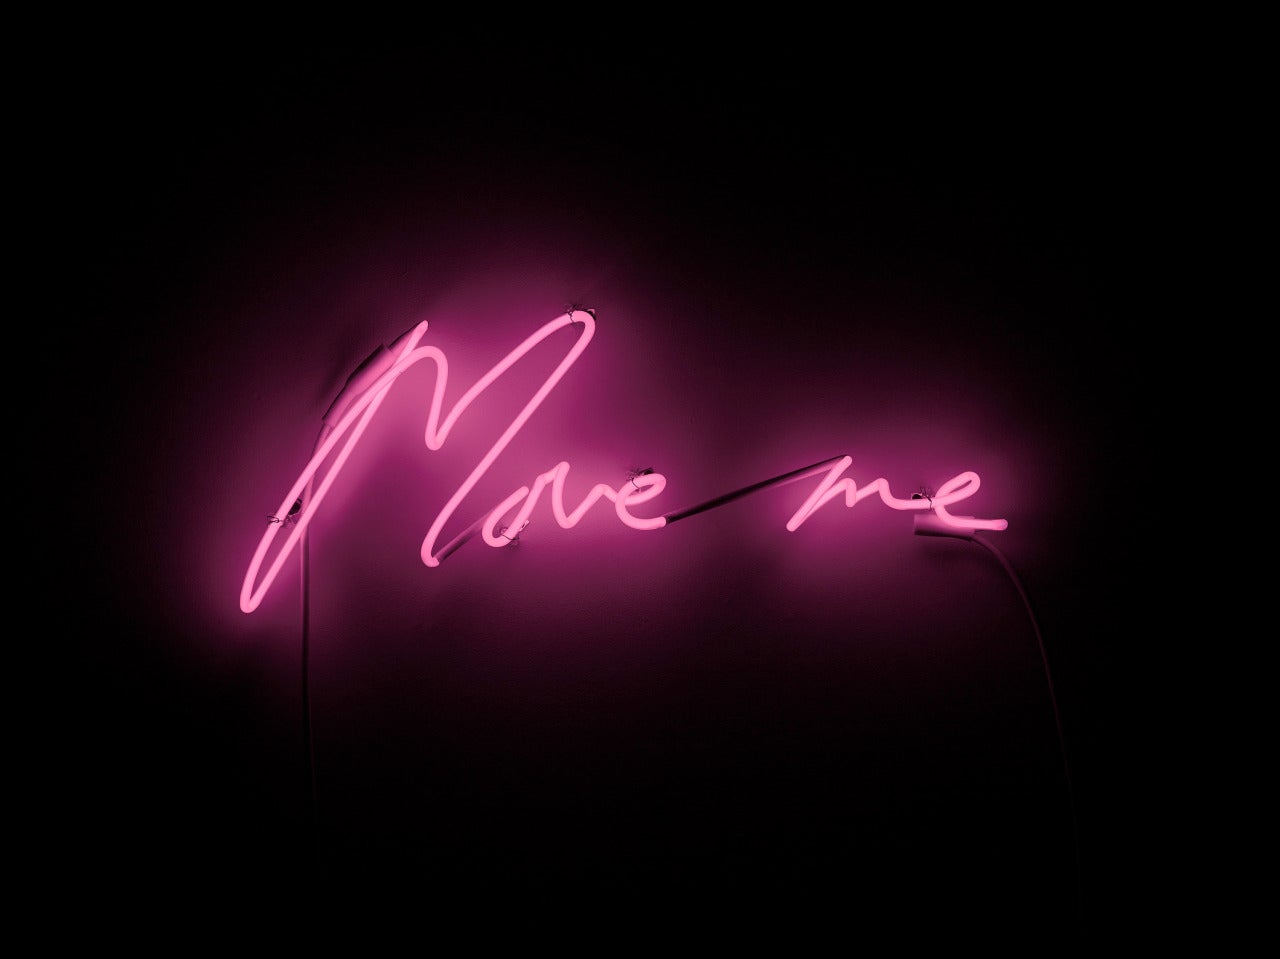 Move Me - Sculpture by Tracey Emin